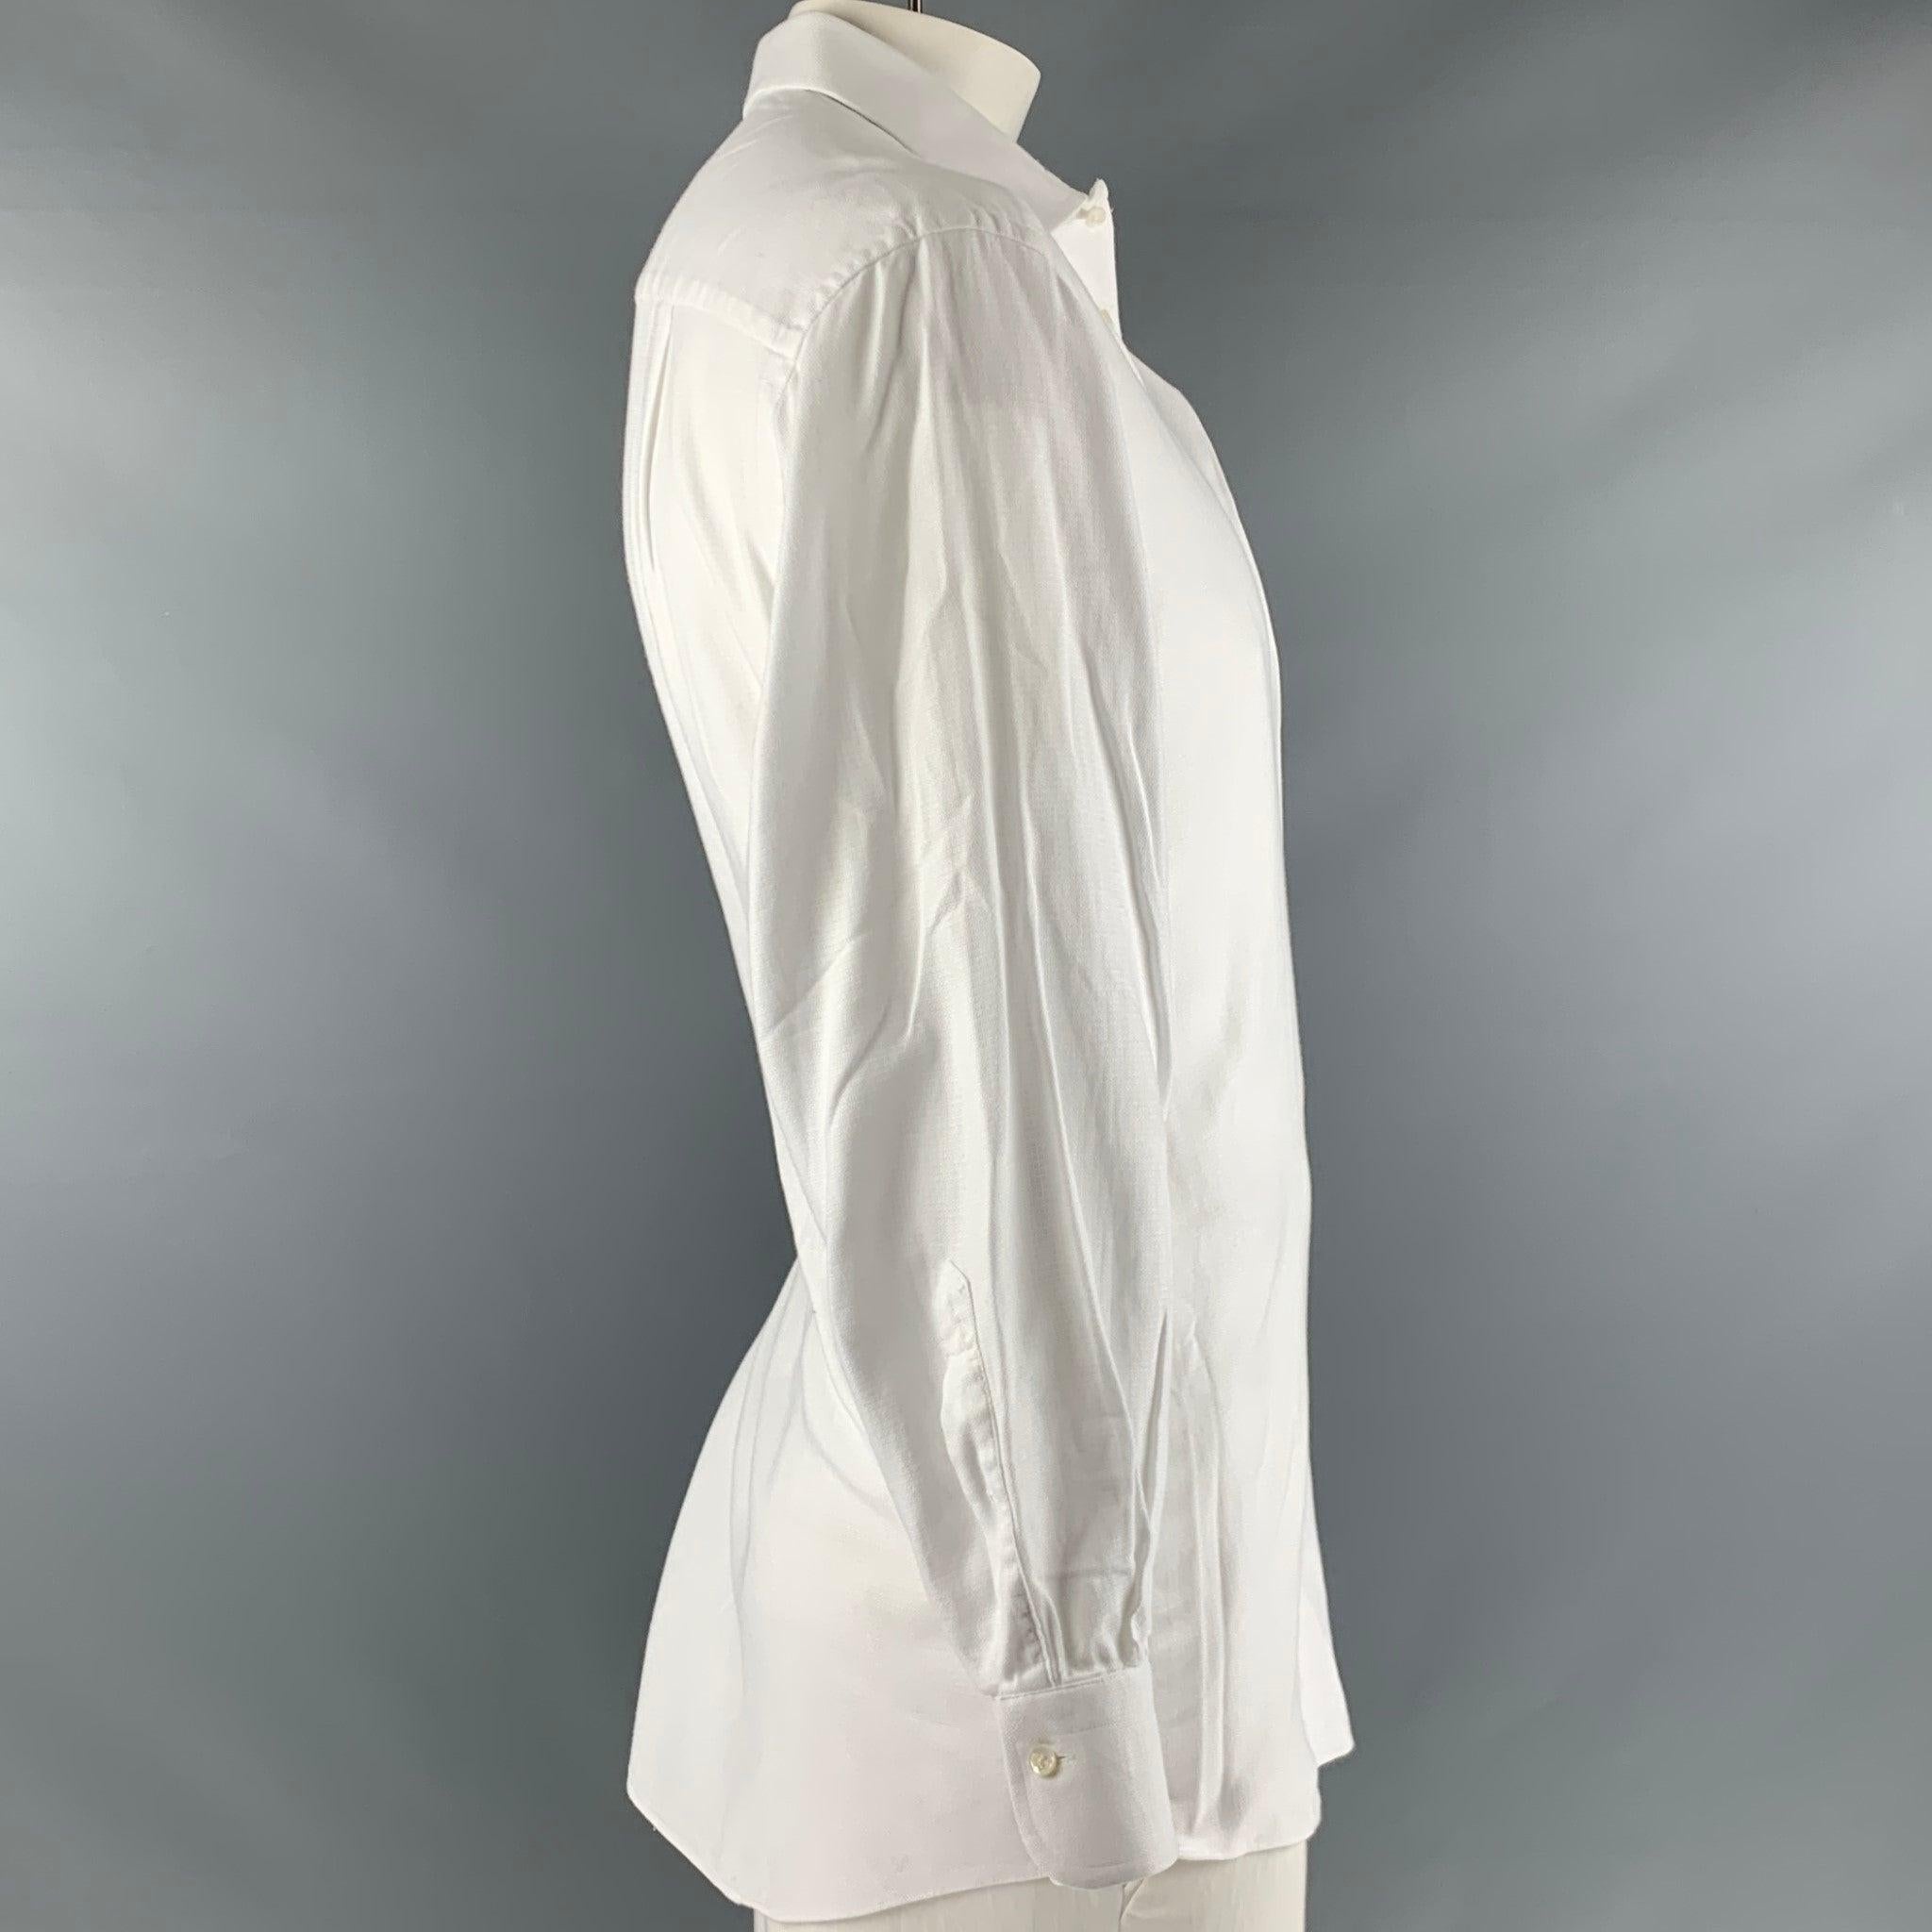 ERMENEGILDO ZEGNA
long sleeve shirt in a white cotton fabric, featuring one pocket and a button closure.Good Pre-Owned Condition.
Moderate signs of wear and one broken button. 

Marked:   41/16 

Measurements: 
 
Shoulder: 18 inches Chest: 41 inches